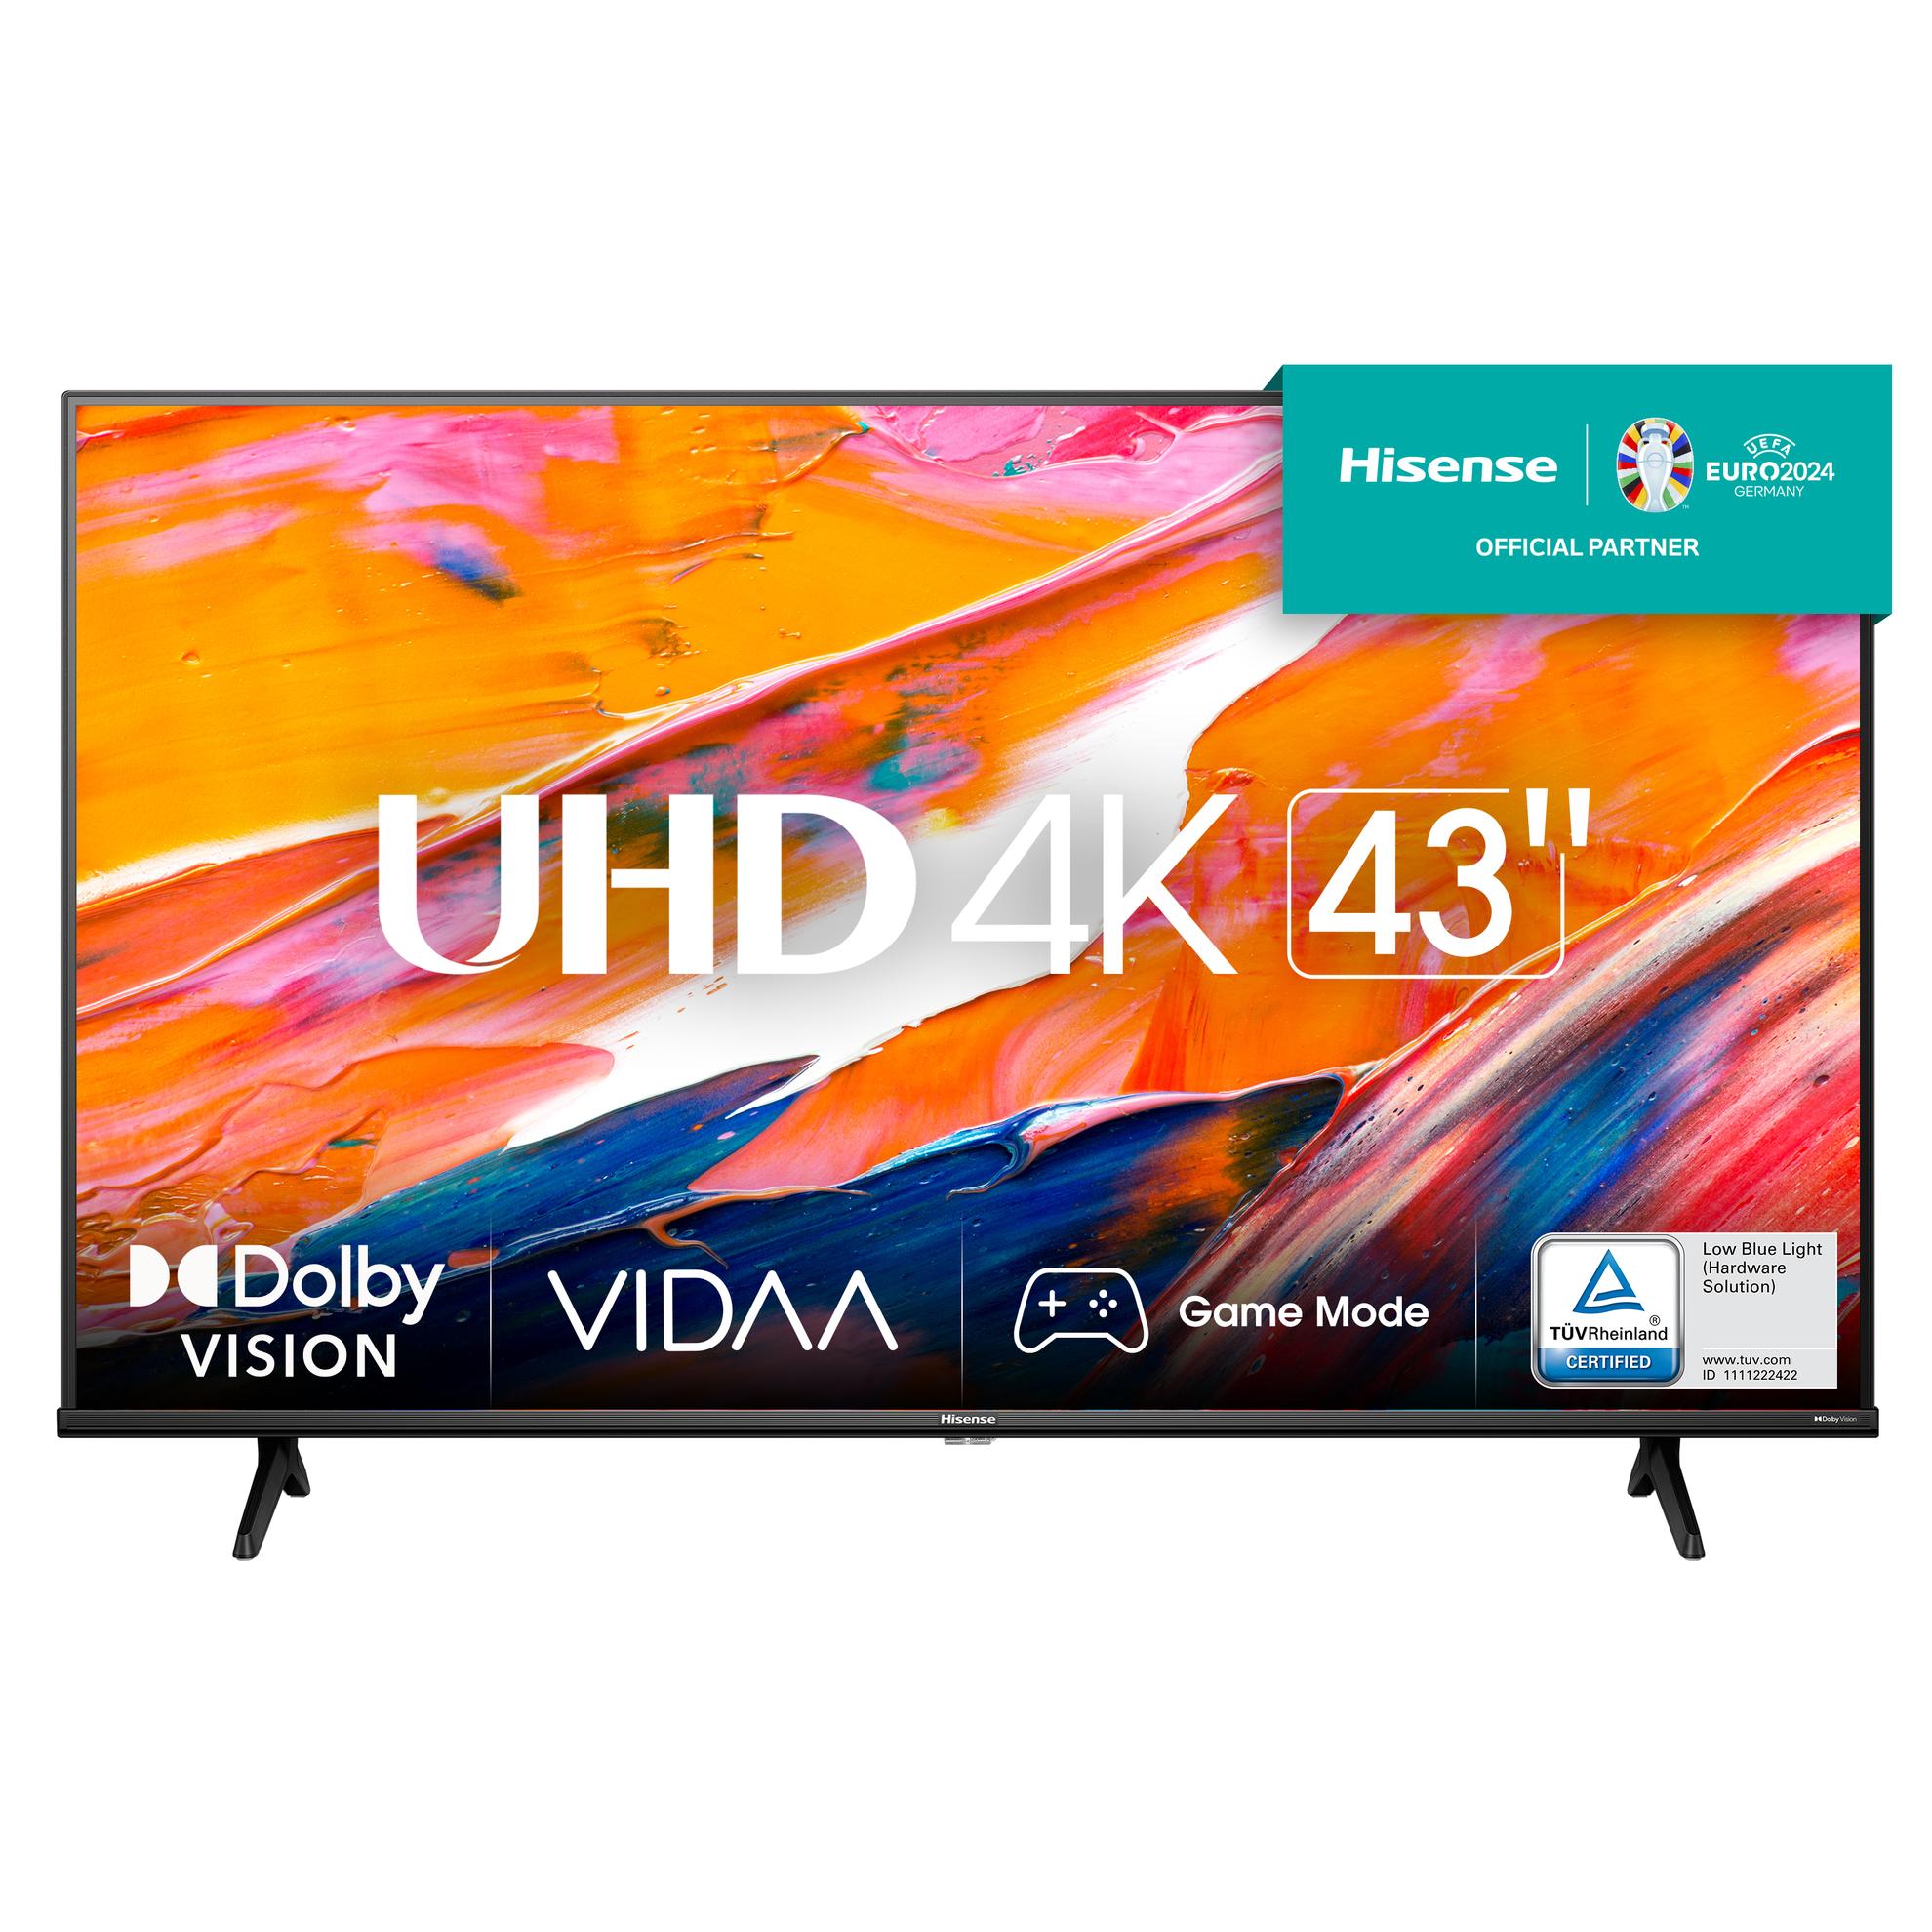 Offerta per Hisense - TV LED Ultra HD 4K 43” 43A6K Smart TV, Wifi, HDR Dolby Vision, AirPlay 2 a 249€ in Spazio Conad